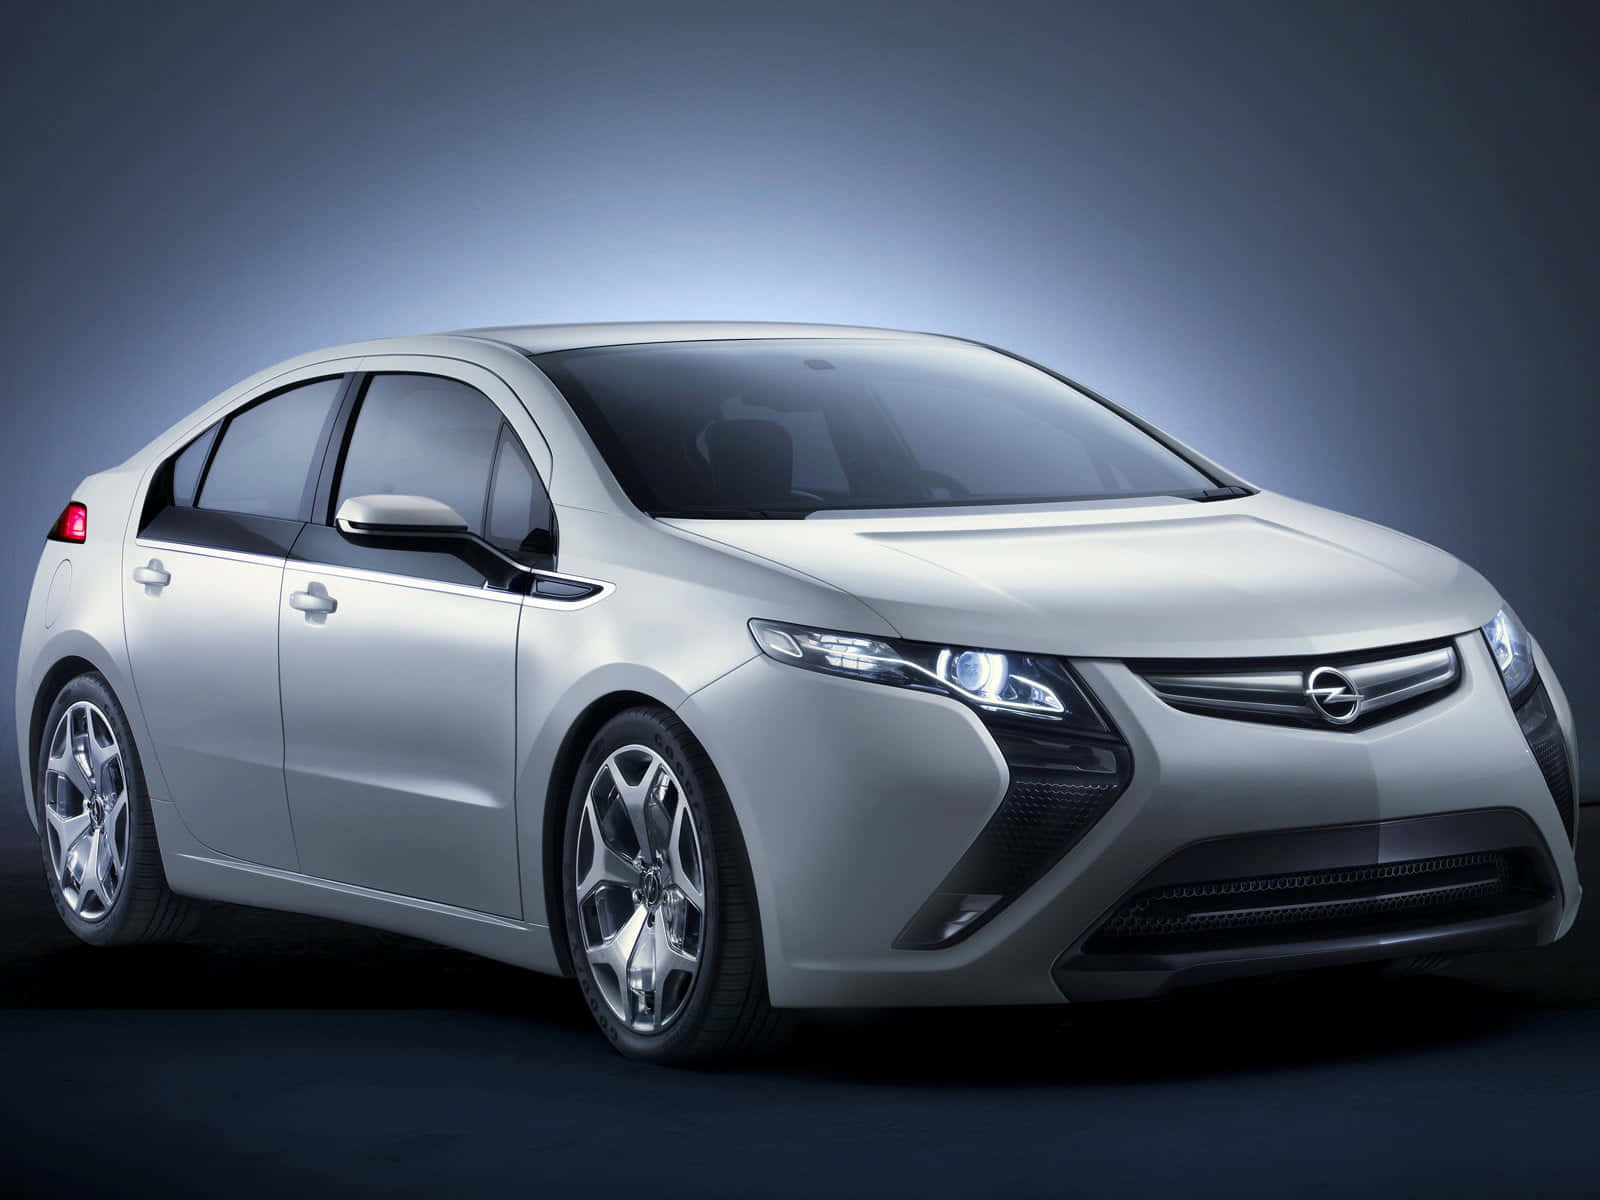 Caption: Sleek And Sophisticated Opel Ampera Wallpaper